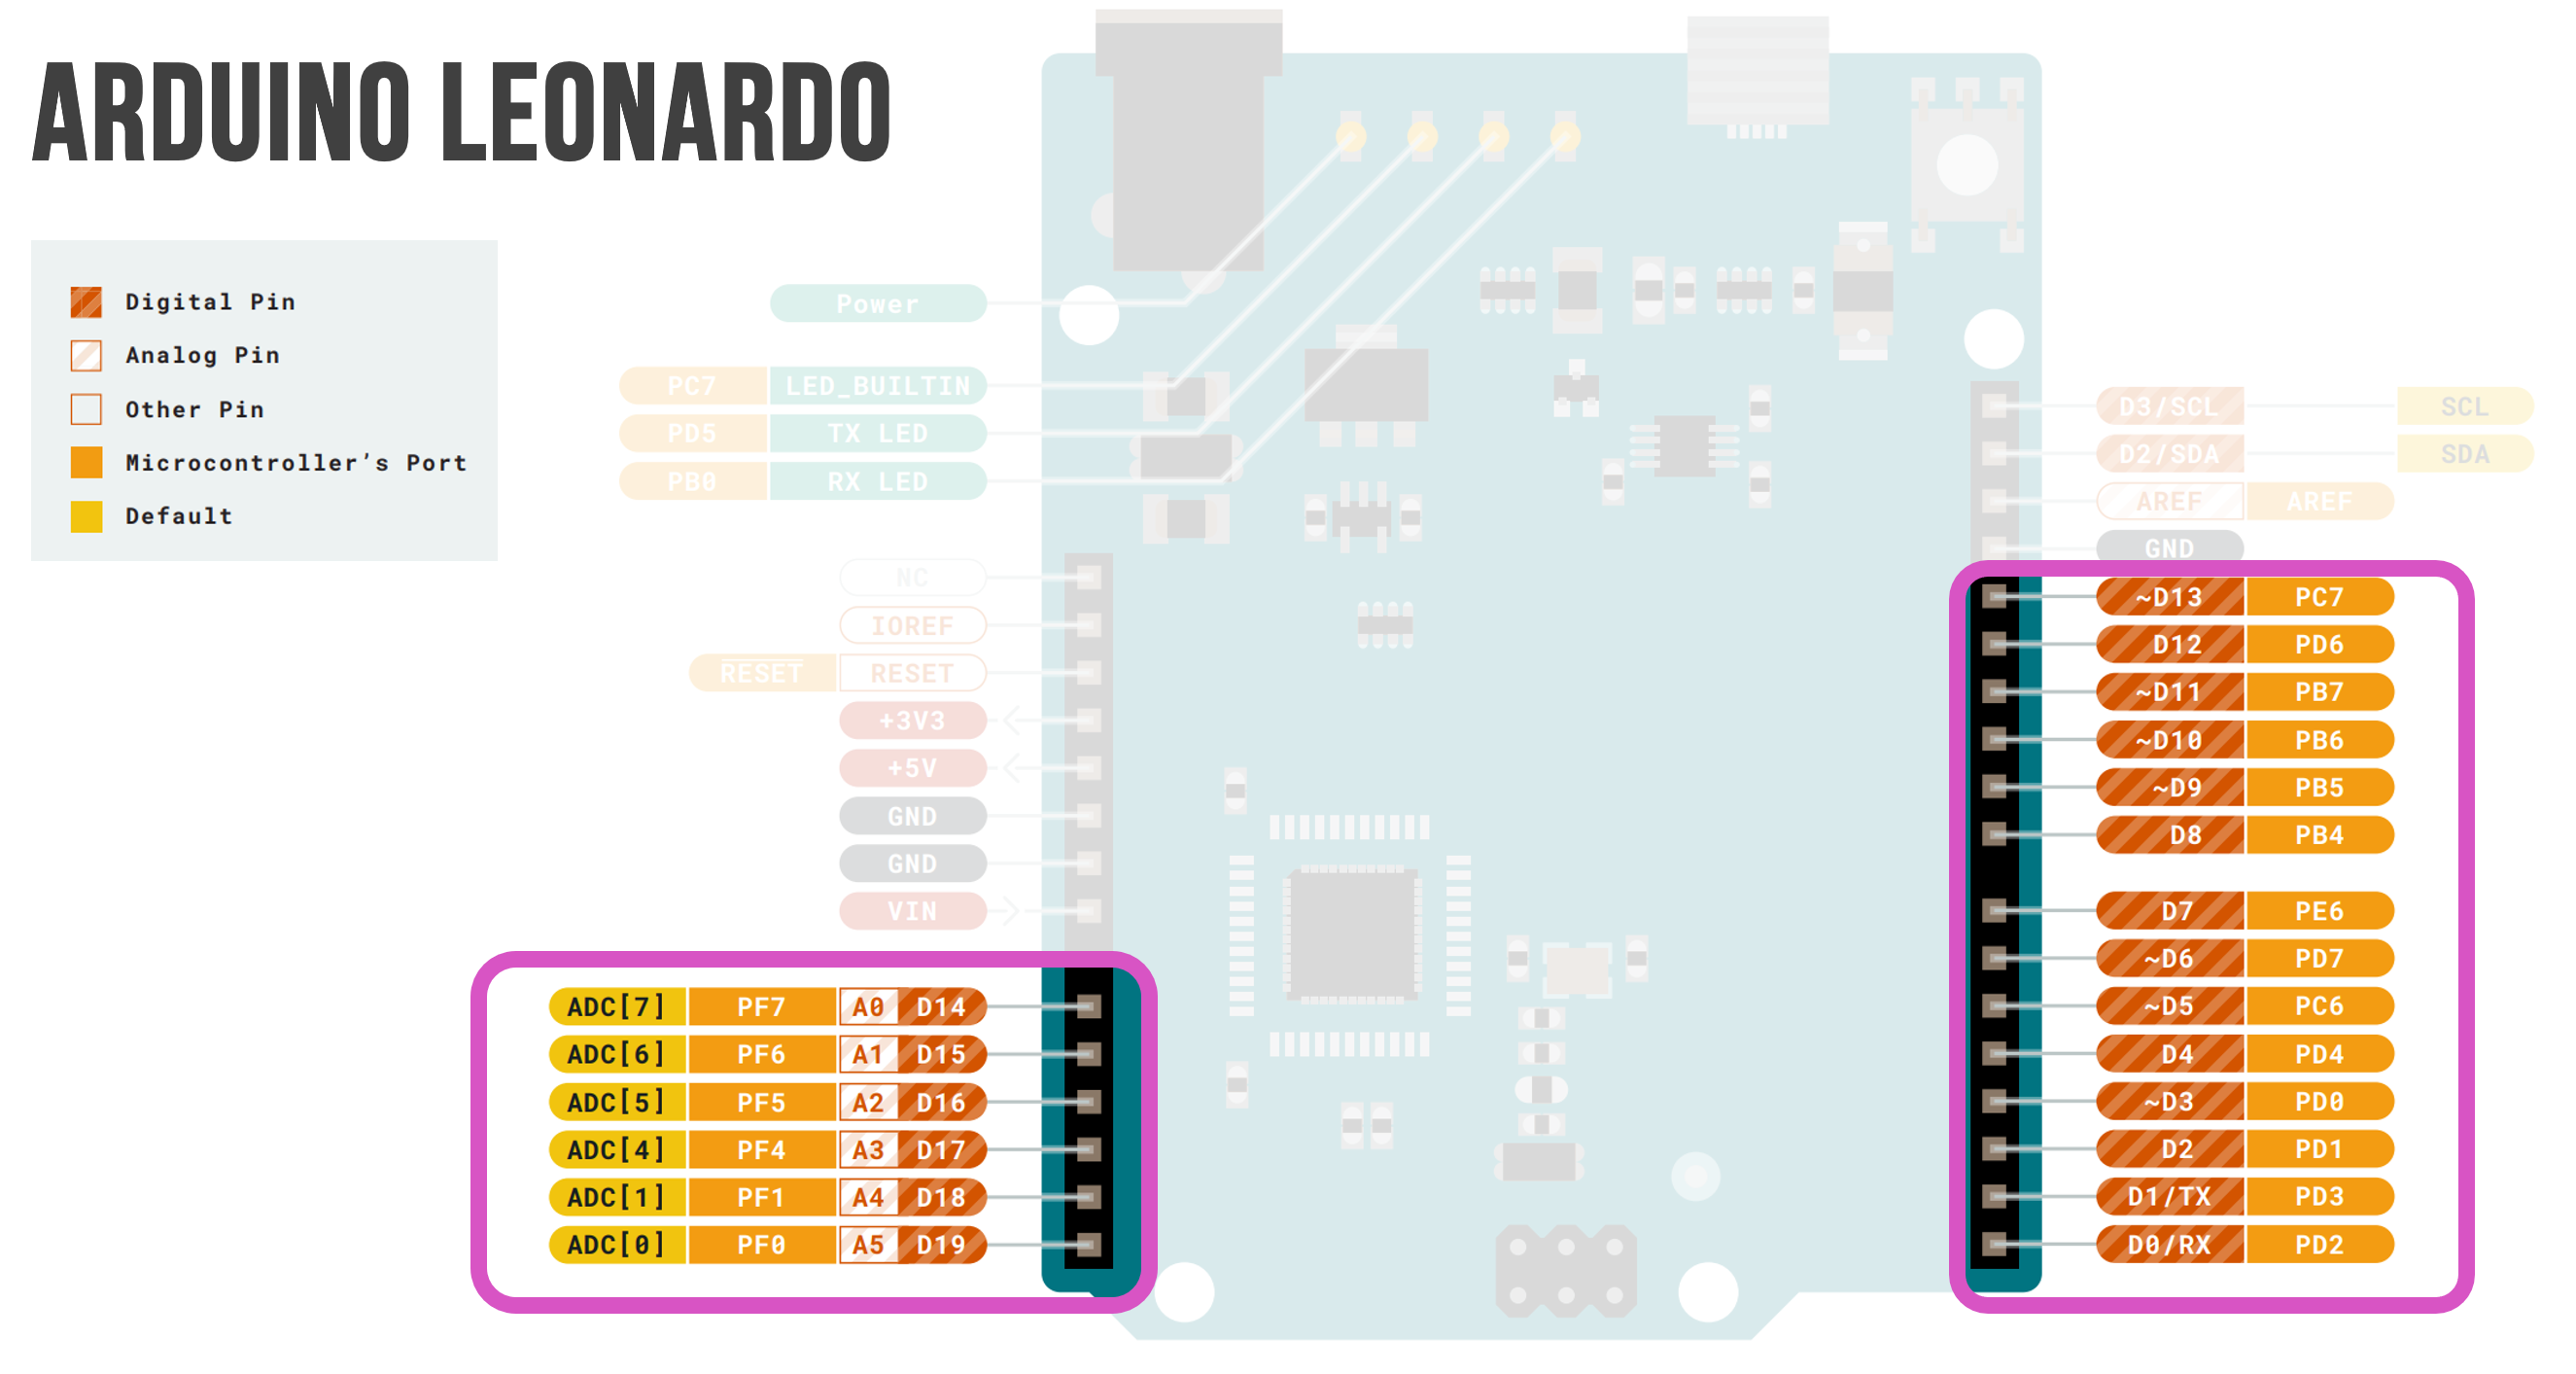 The official Arduino Leonardo pinout diagram with the 20 digital I/O pins marked